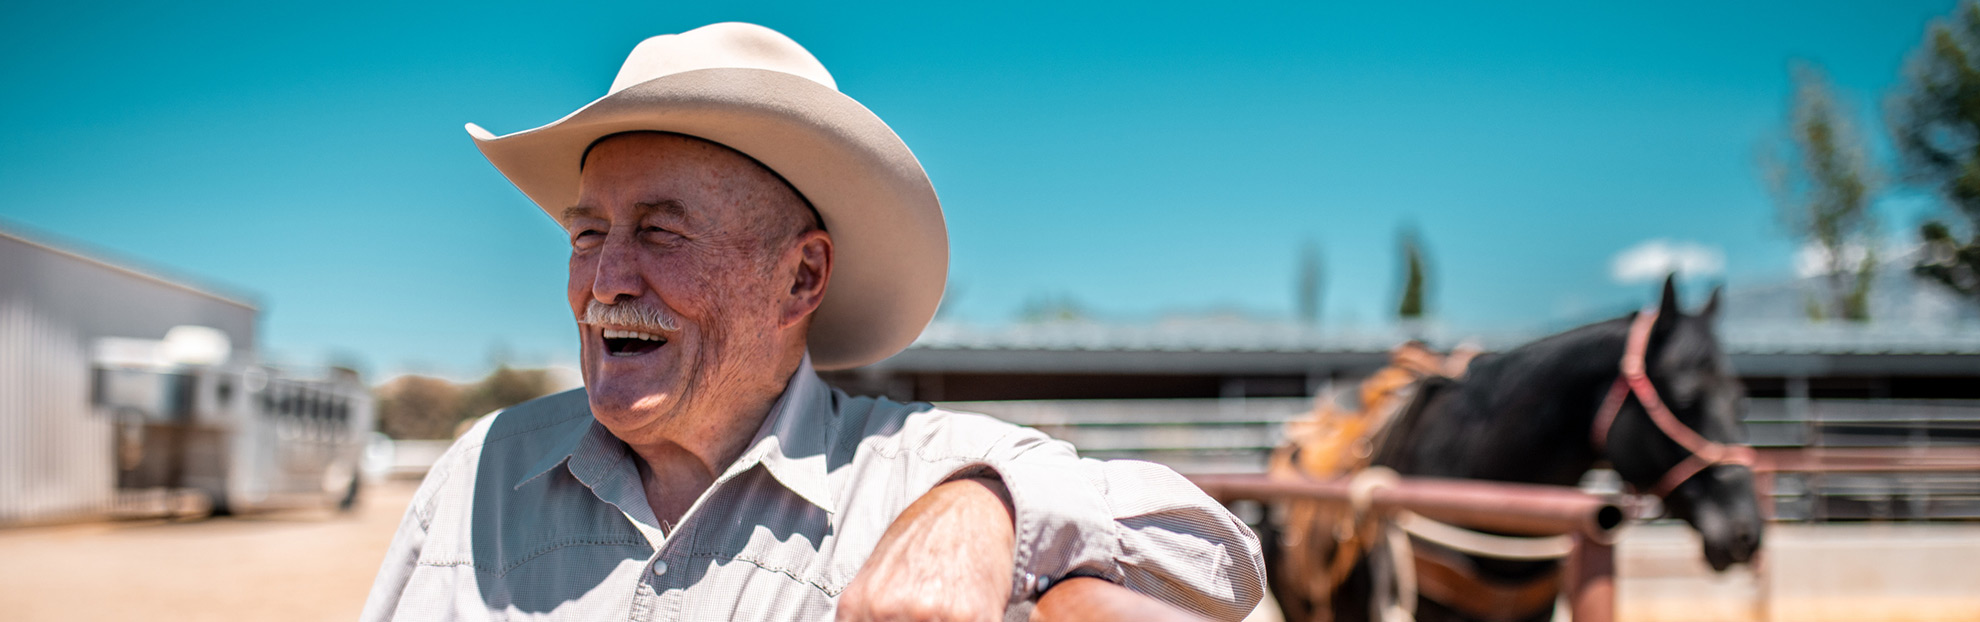 Arizona glaucoma eye care patient smiling and happy on his ranch